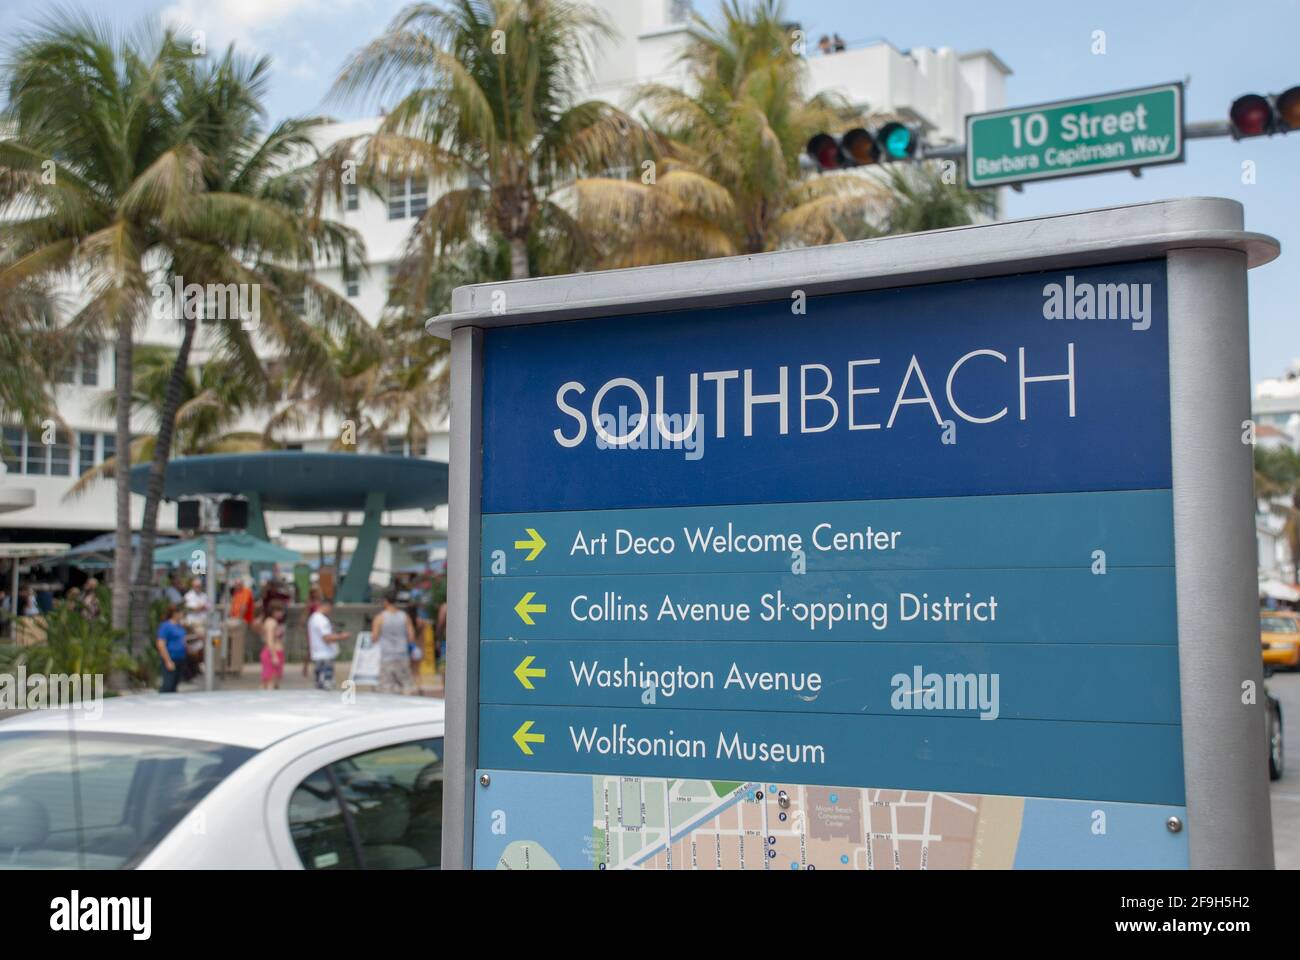 ParkMobile Contactless Parking Payment in Miami Beach - MIAMI, FLORIDA -  FEBRUARY 14, 2022 Stock Photo - Alamy